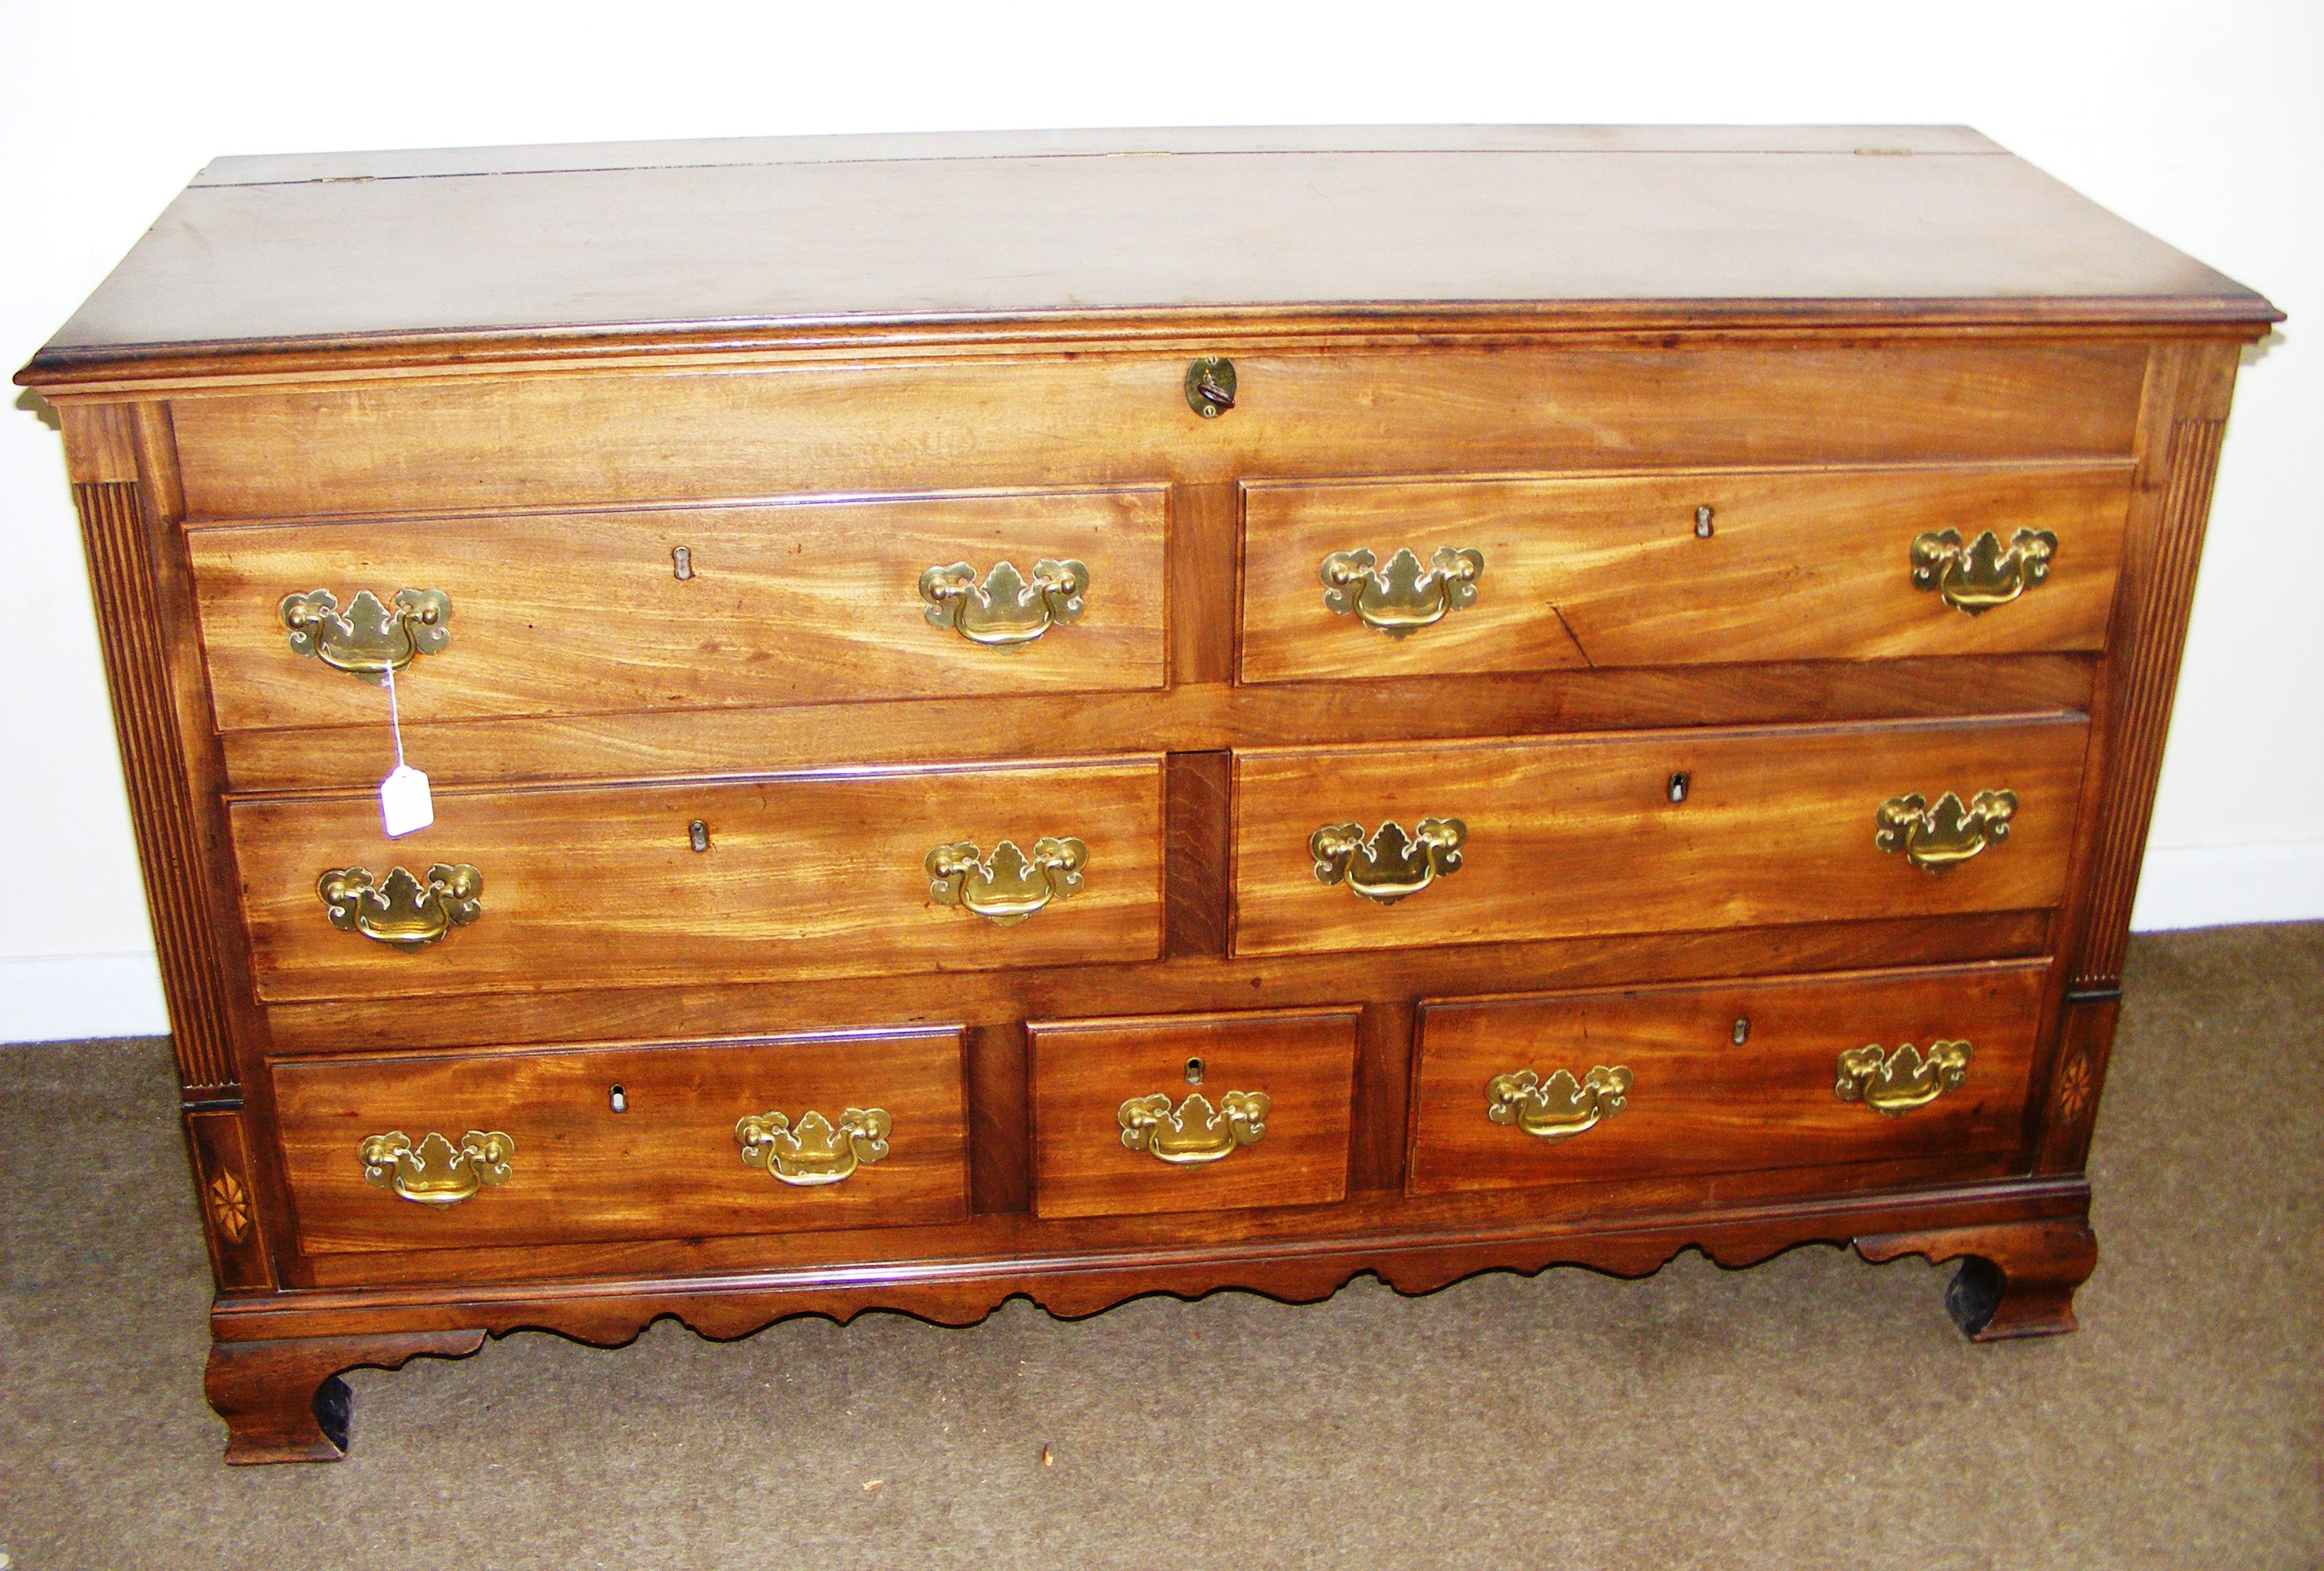 A Victorian mahogany 7 compartment chest of drawers with decorative brass handles,